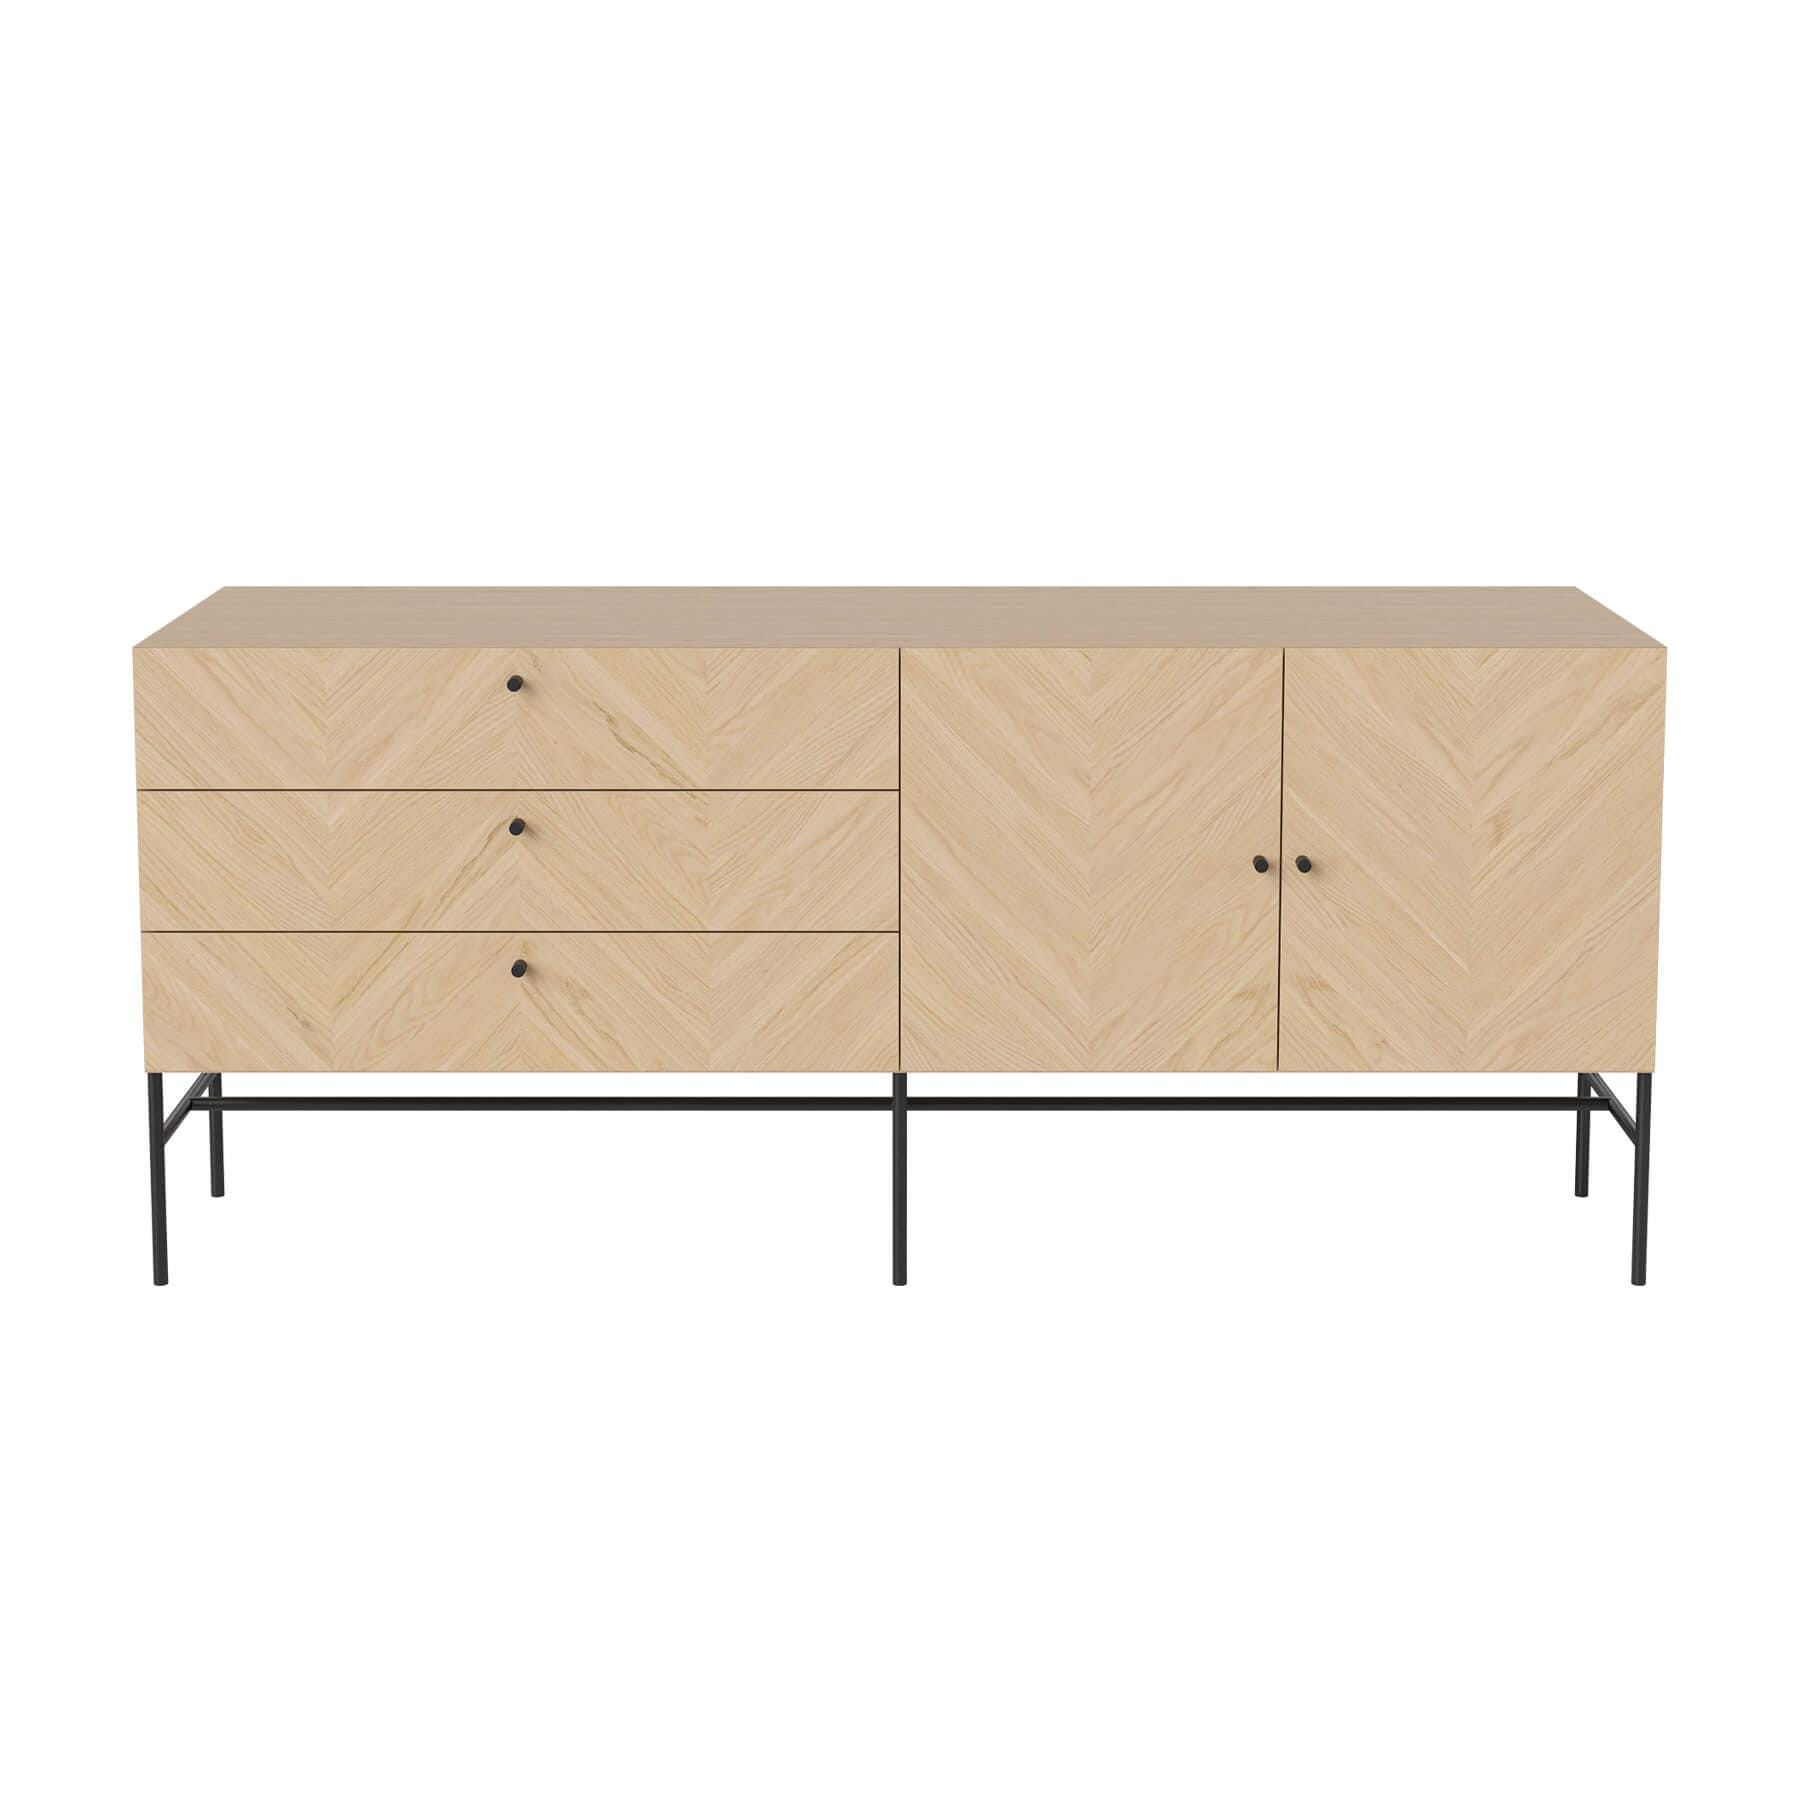 Bolia Luxe Sideboard White Pigmented Oak Black Door Knobs Light Wood Designer Furniture From Holloways Of Ludlow